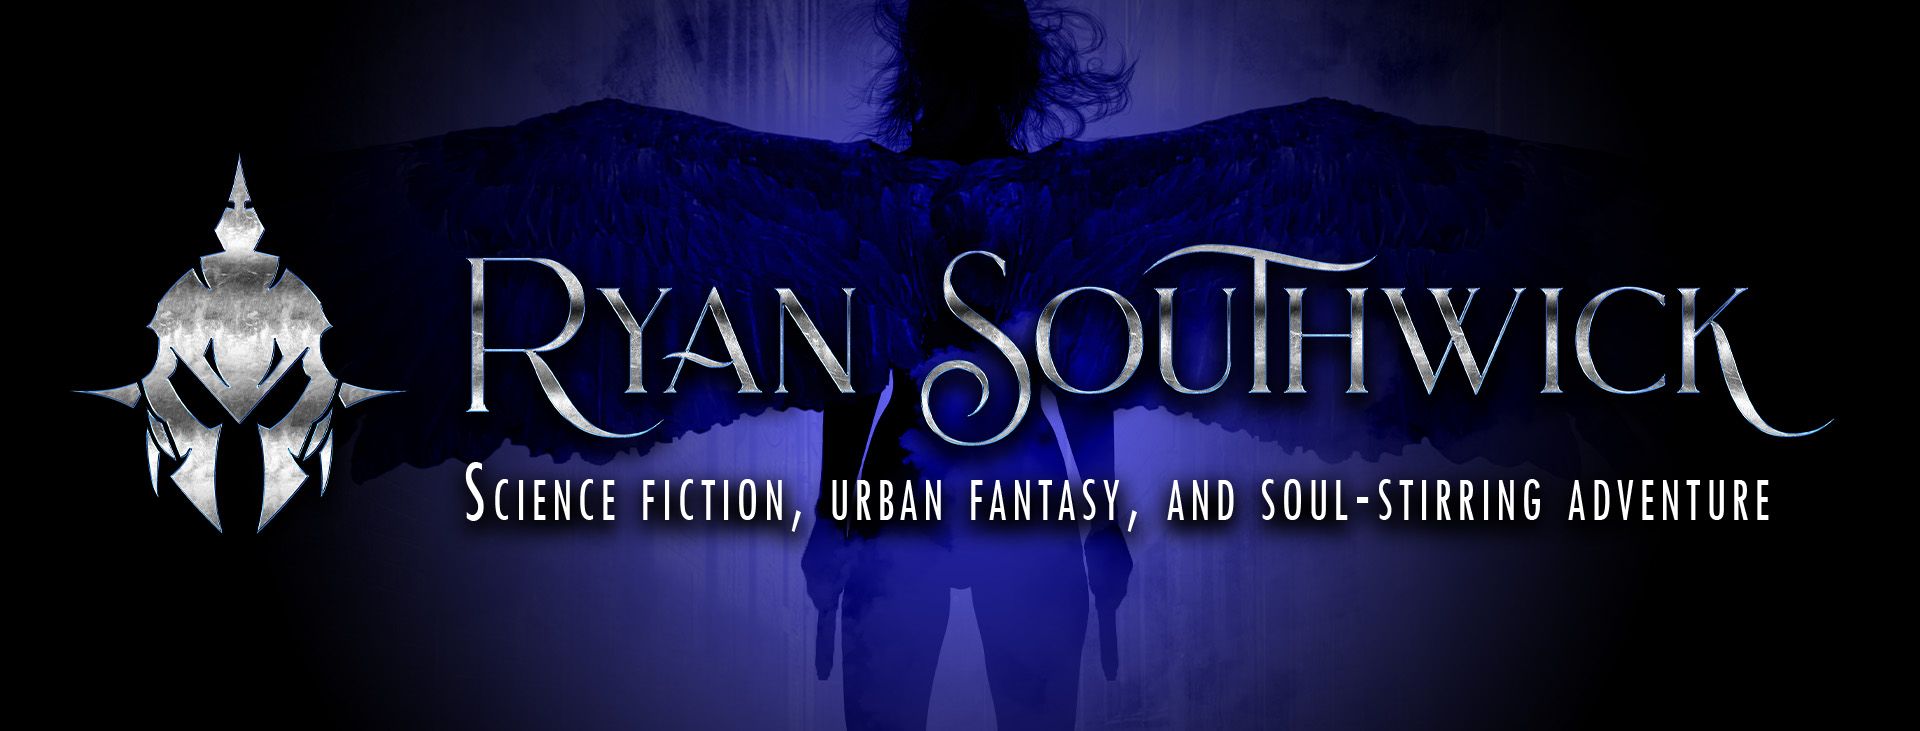 Author logo (Silver knight helmet with spikes), "Ryan Southwick" "Science fiction, Urban Fantasy, and Soul-Stirring Adventure